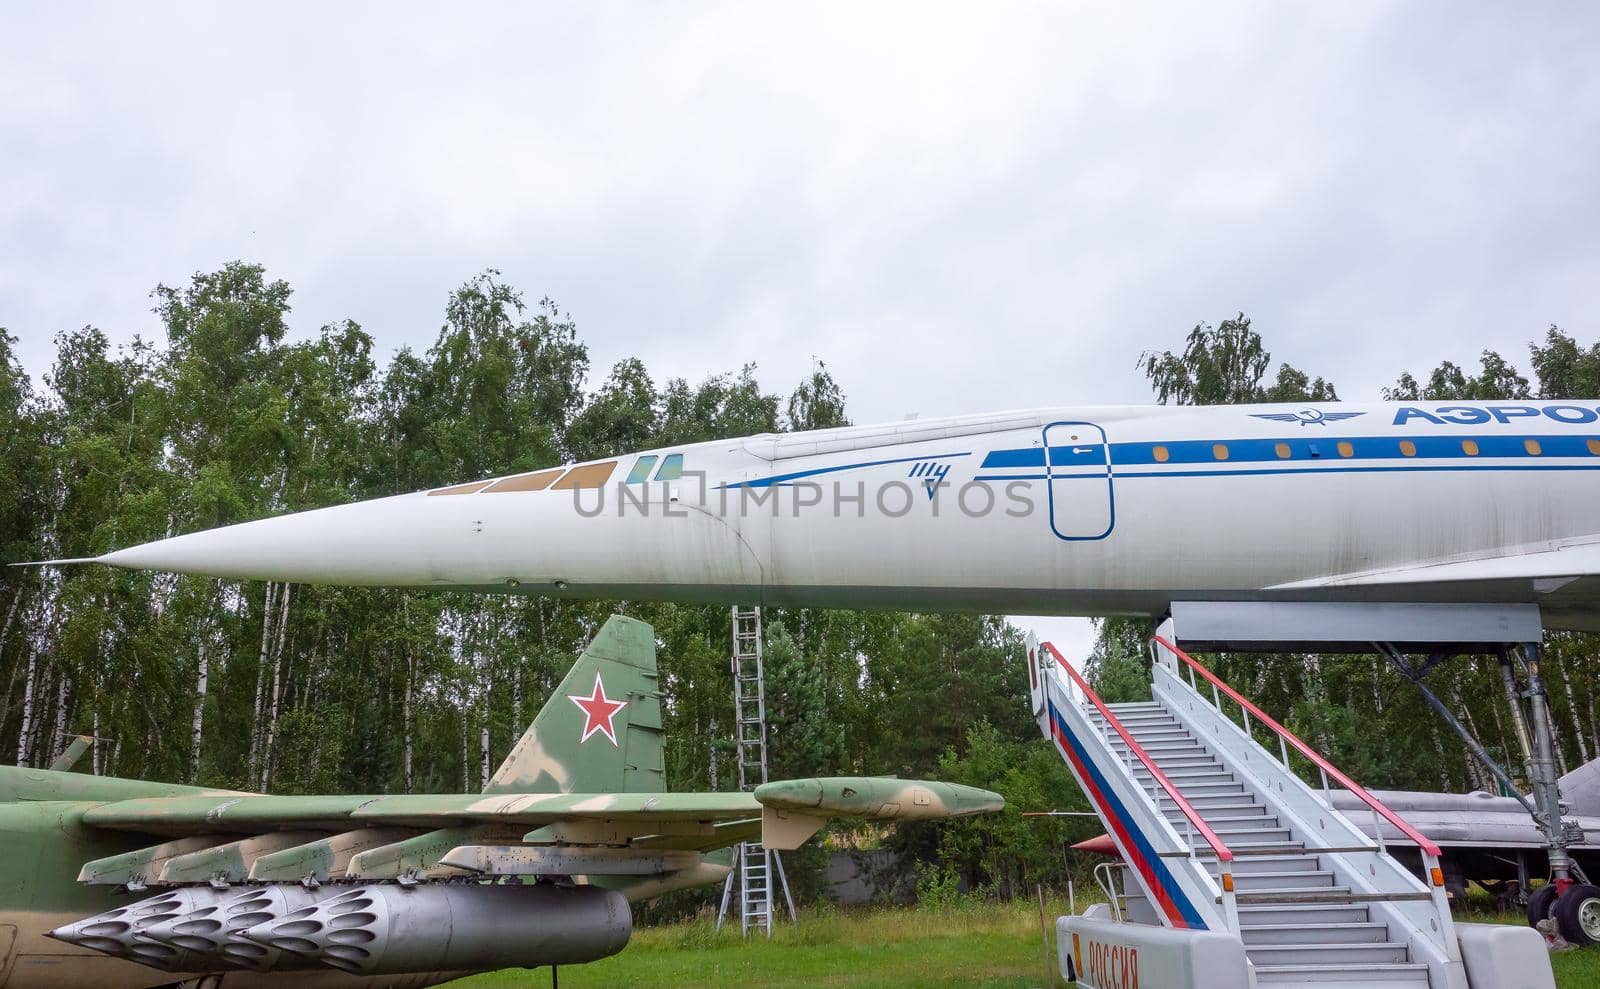 July 18, 2018, Moscow region, Russia. Soviet supersonic passenger aircraft Tupolev Tu-144 at the Central Museum of the Russian Air Force in Monino.